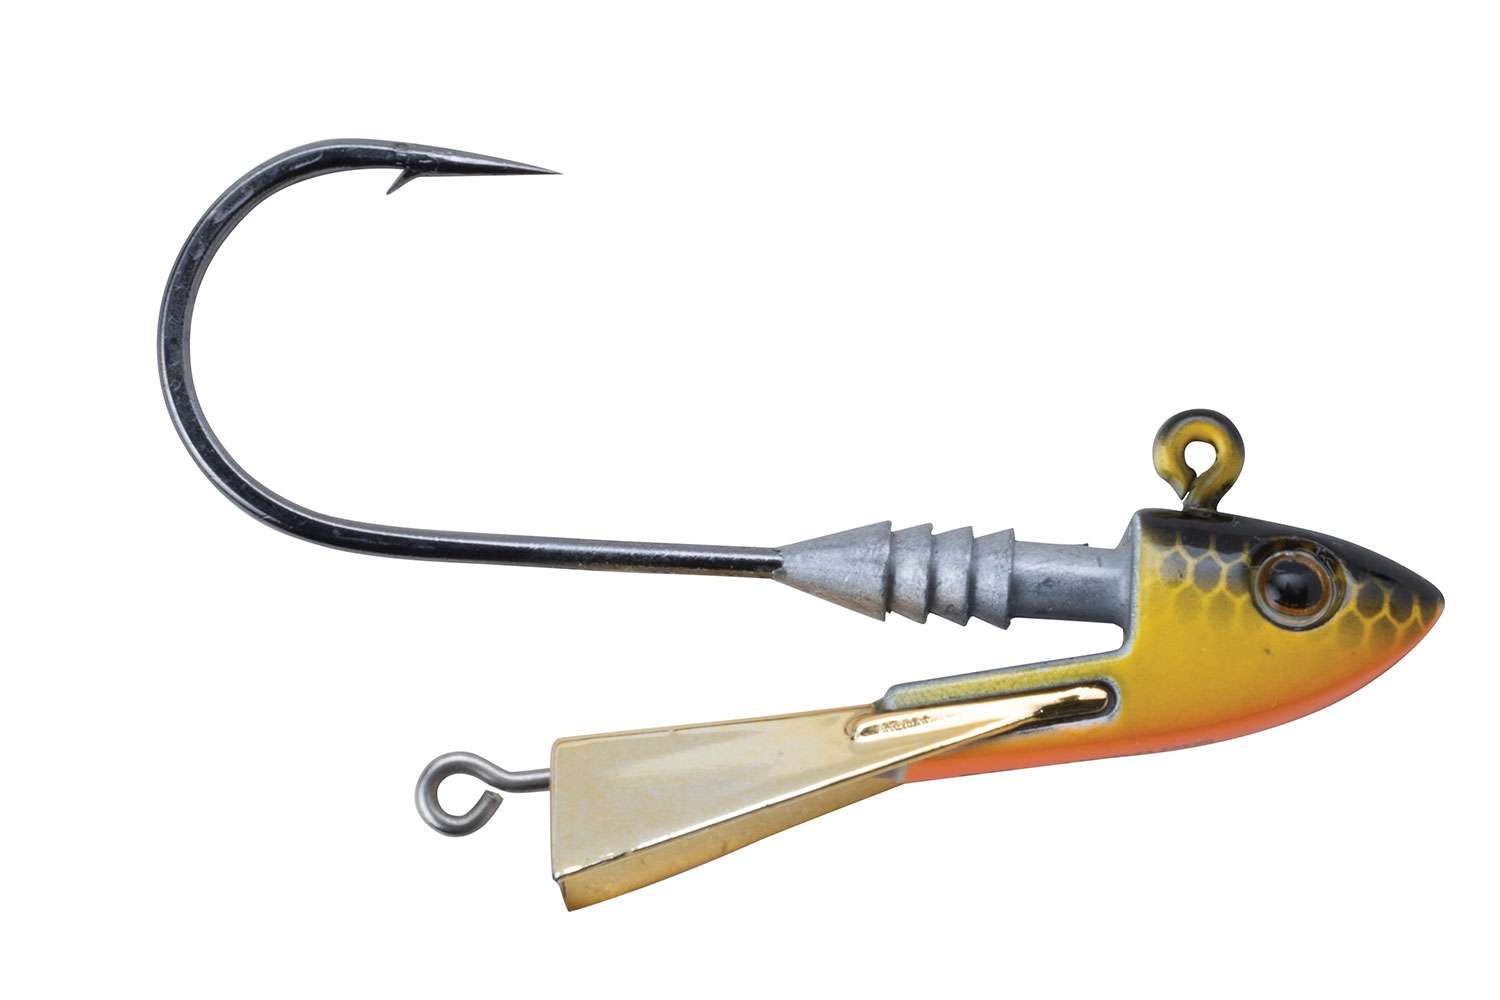   <B> Berkley Fusion19 Snap Jigs </B>
<BR>The Berkley Fusion19 Snap Jig is a versatile action jig head that pairs with your favorite soft plastics. The Snap Jig can be fished vertically over structure, for suspended fish in open water, or through the ice. Fish them cast and retrieve for side to side and backward and forward dynamic darting action. Features an extended conical bait keeper to secure soft plastics, a utility eye for stinger hooks or spinner blades, and Fusion19 hooks. Sizes from 3/16 to 3/4 ounces and hooks from 1/0 to 6/0. 
<BR>
<B>MSRP: $6.99
</B>